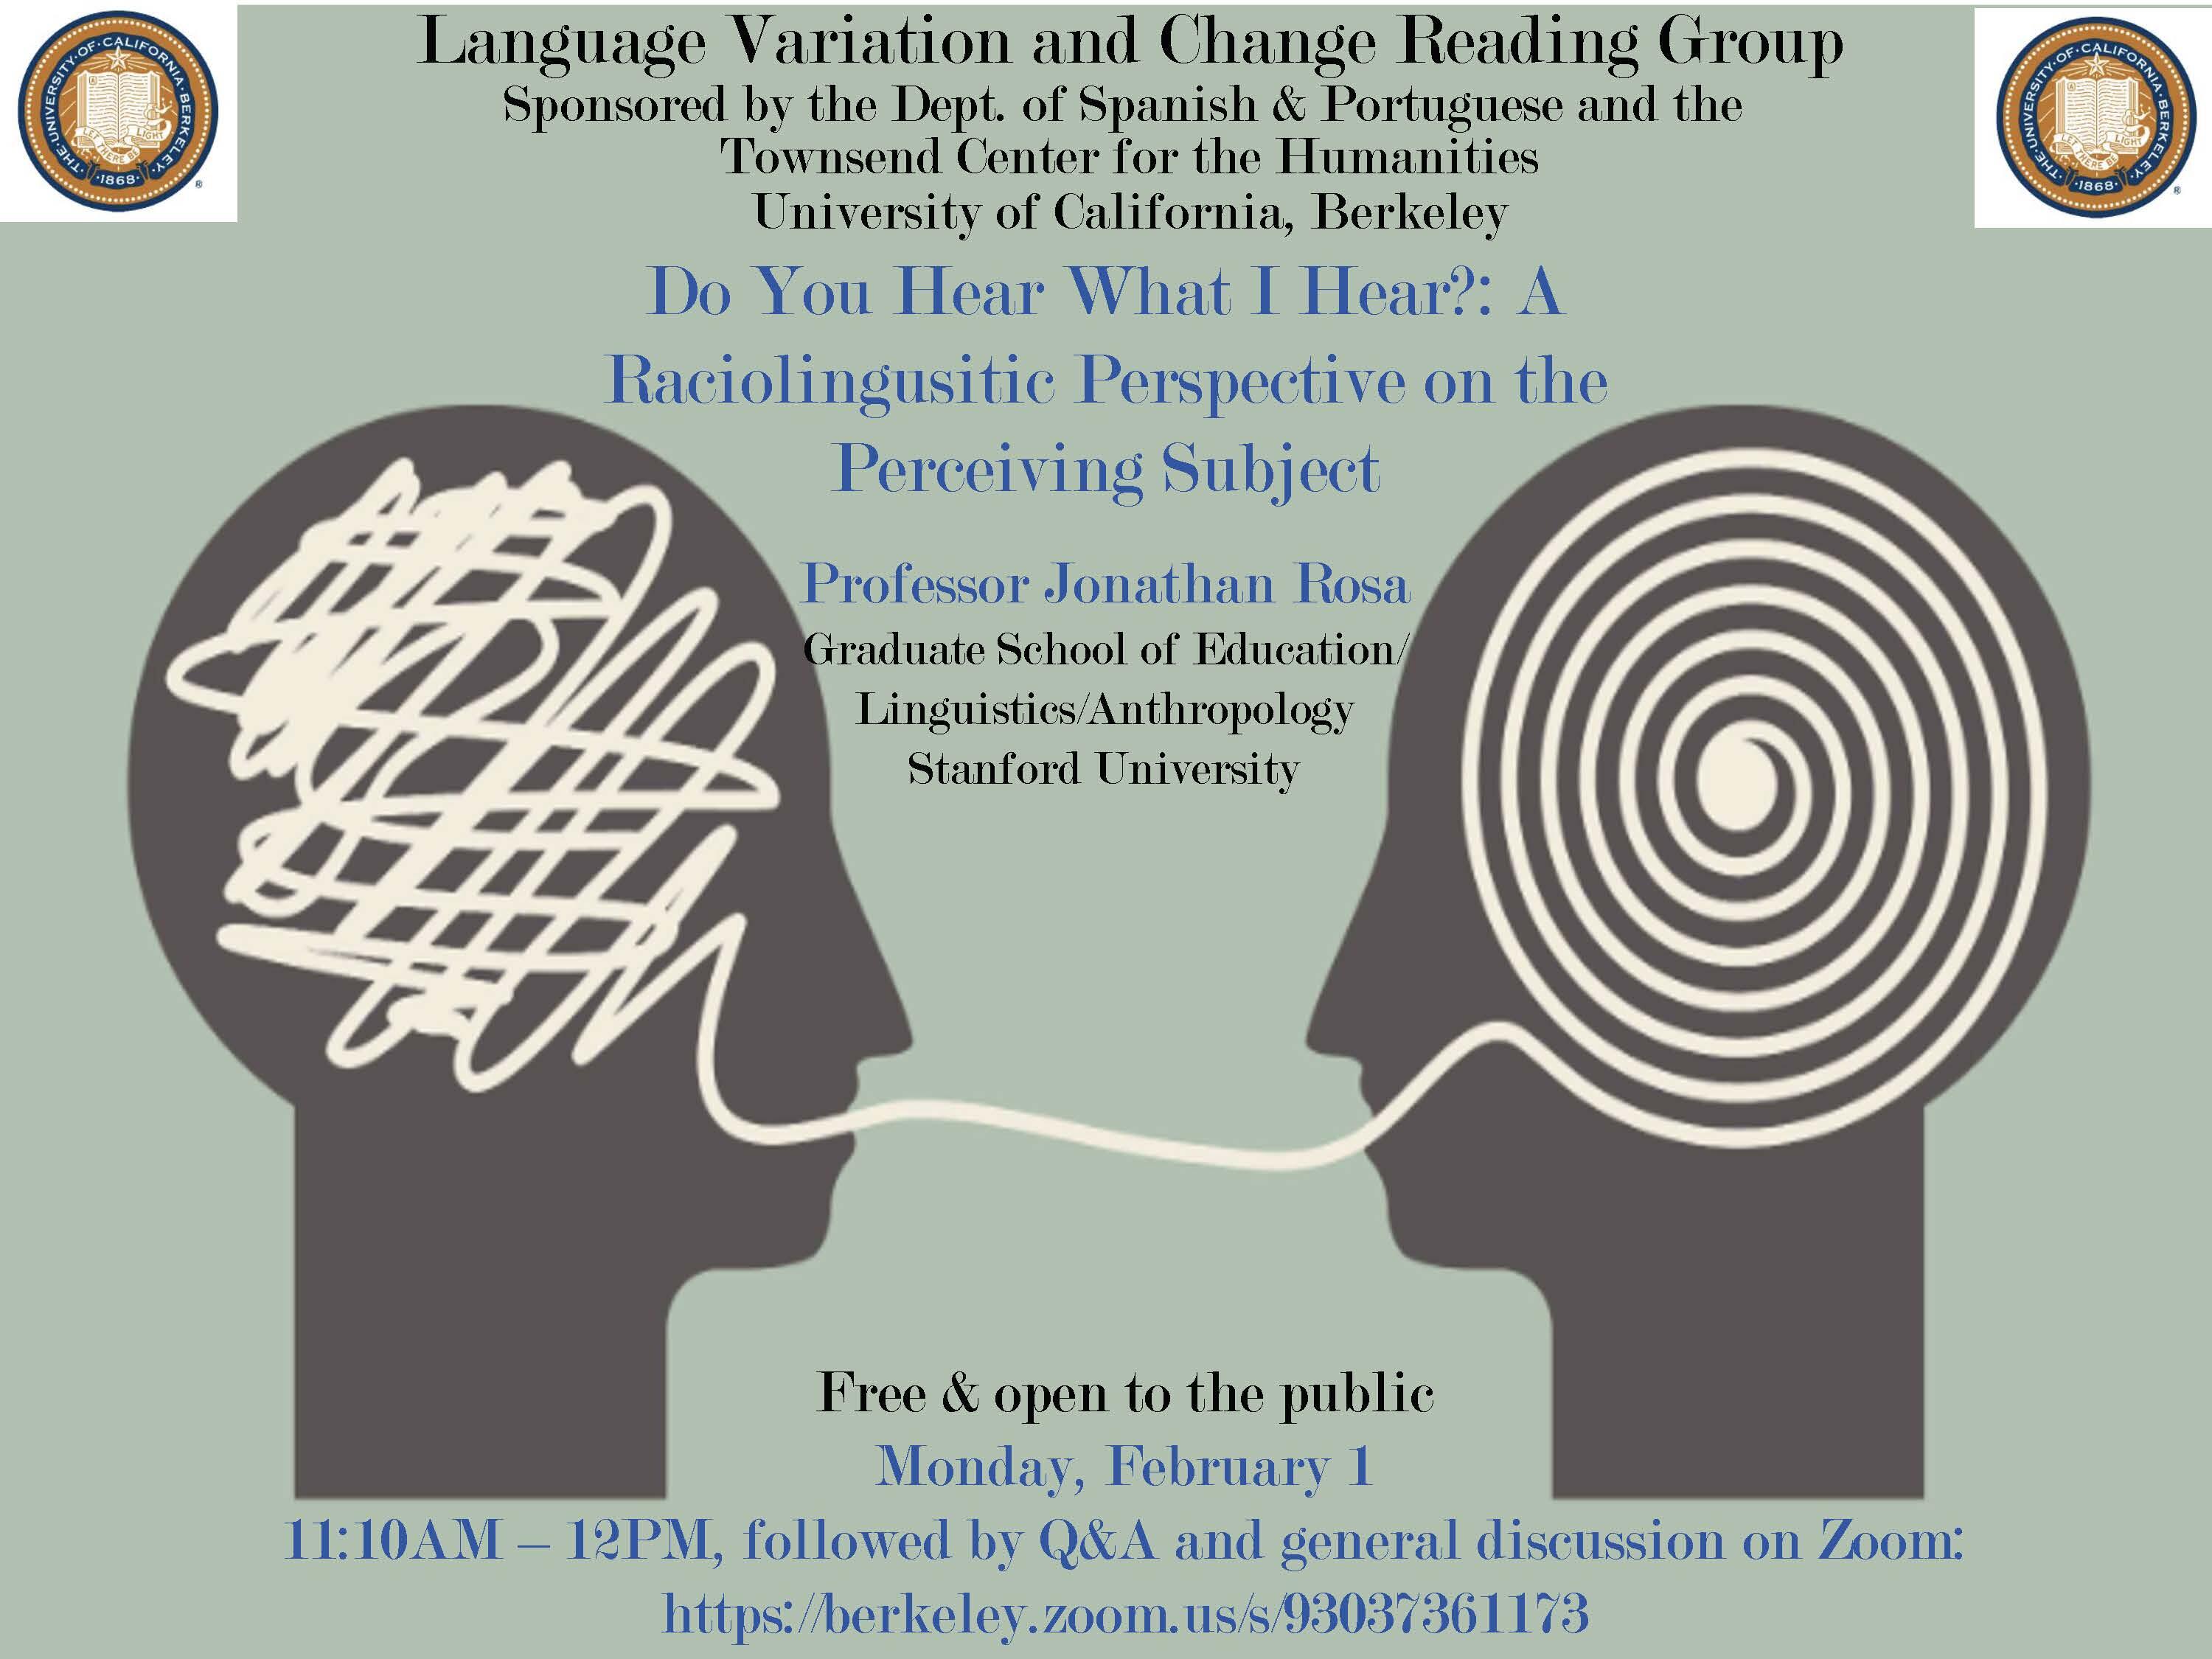 Do You Hear What I Hear?: A Raciolingusitic Perspective on the Perceiving Subject – Professor Jonathan Rosa, Stanford University